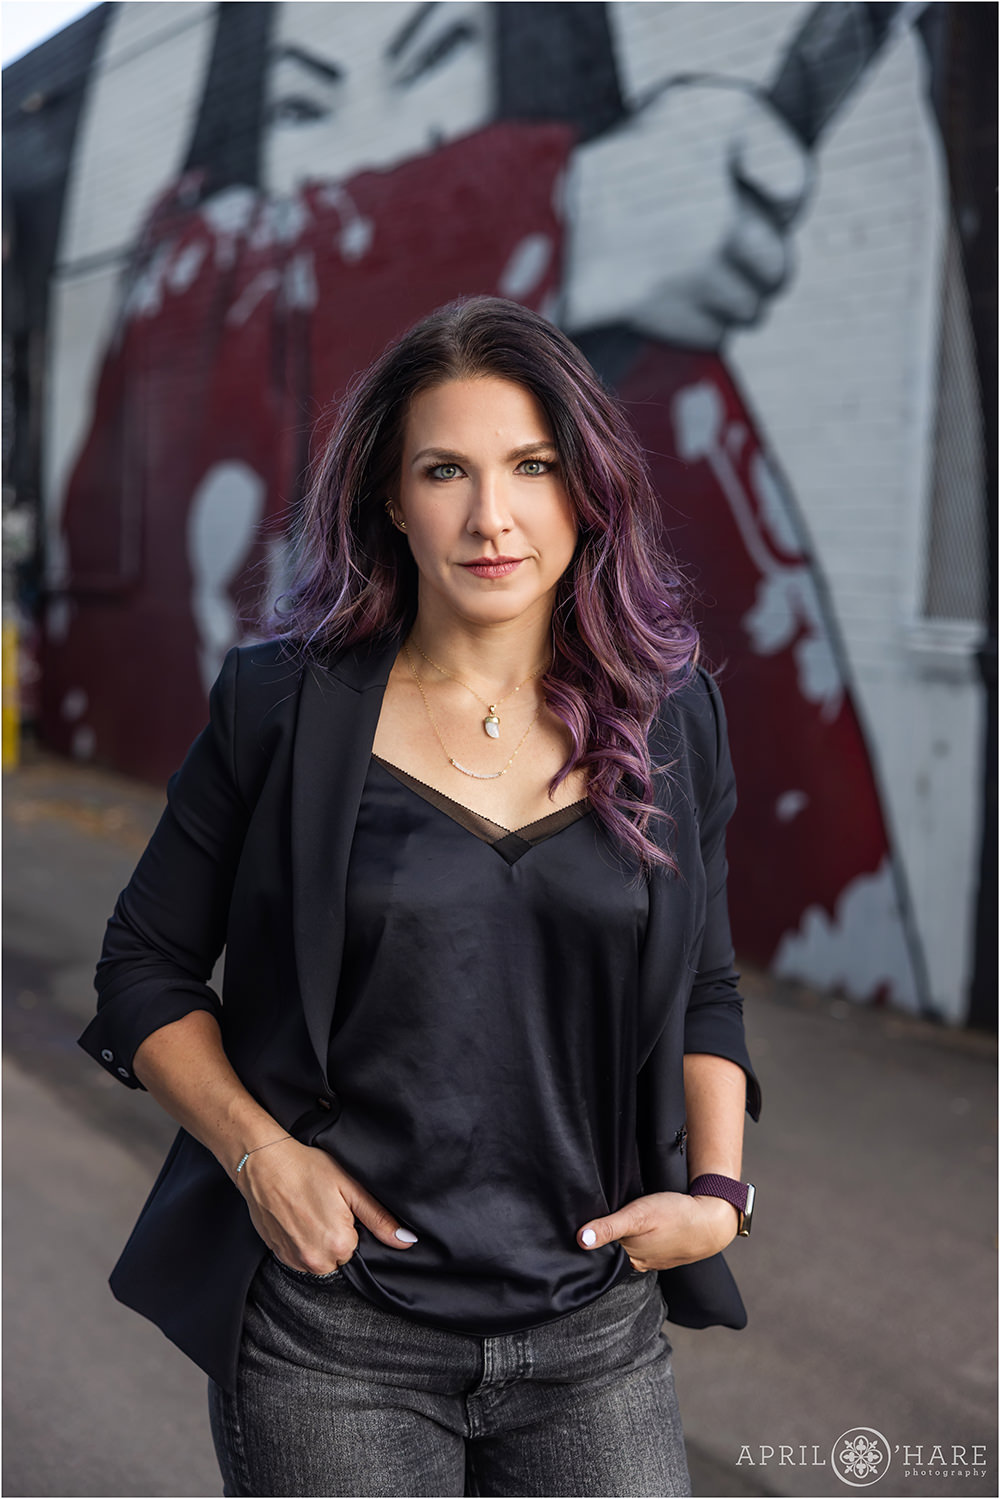 Gorgeous woman with a serious business look with purple hair in an alleyway in North Denver